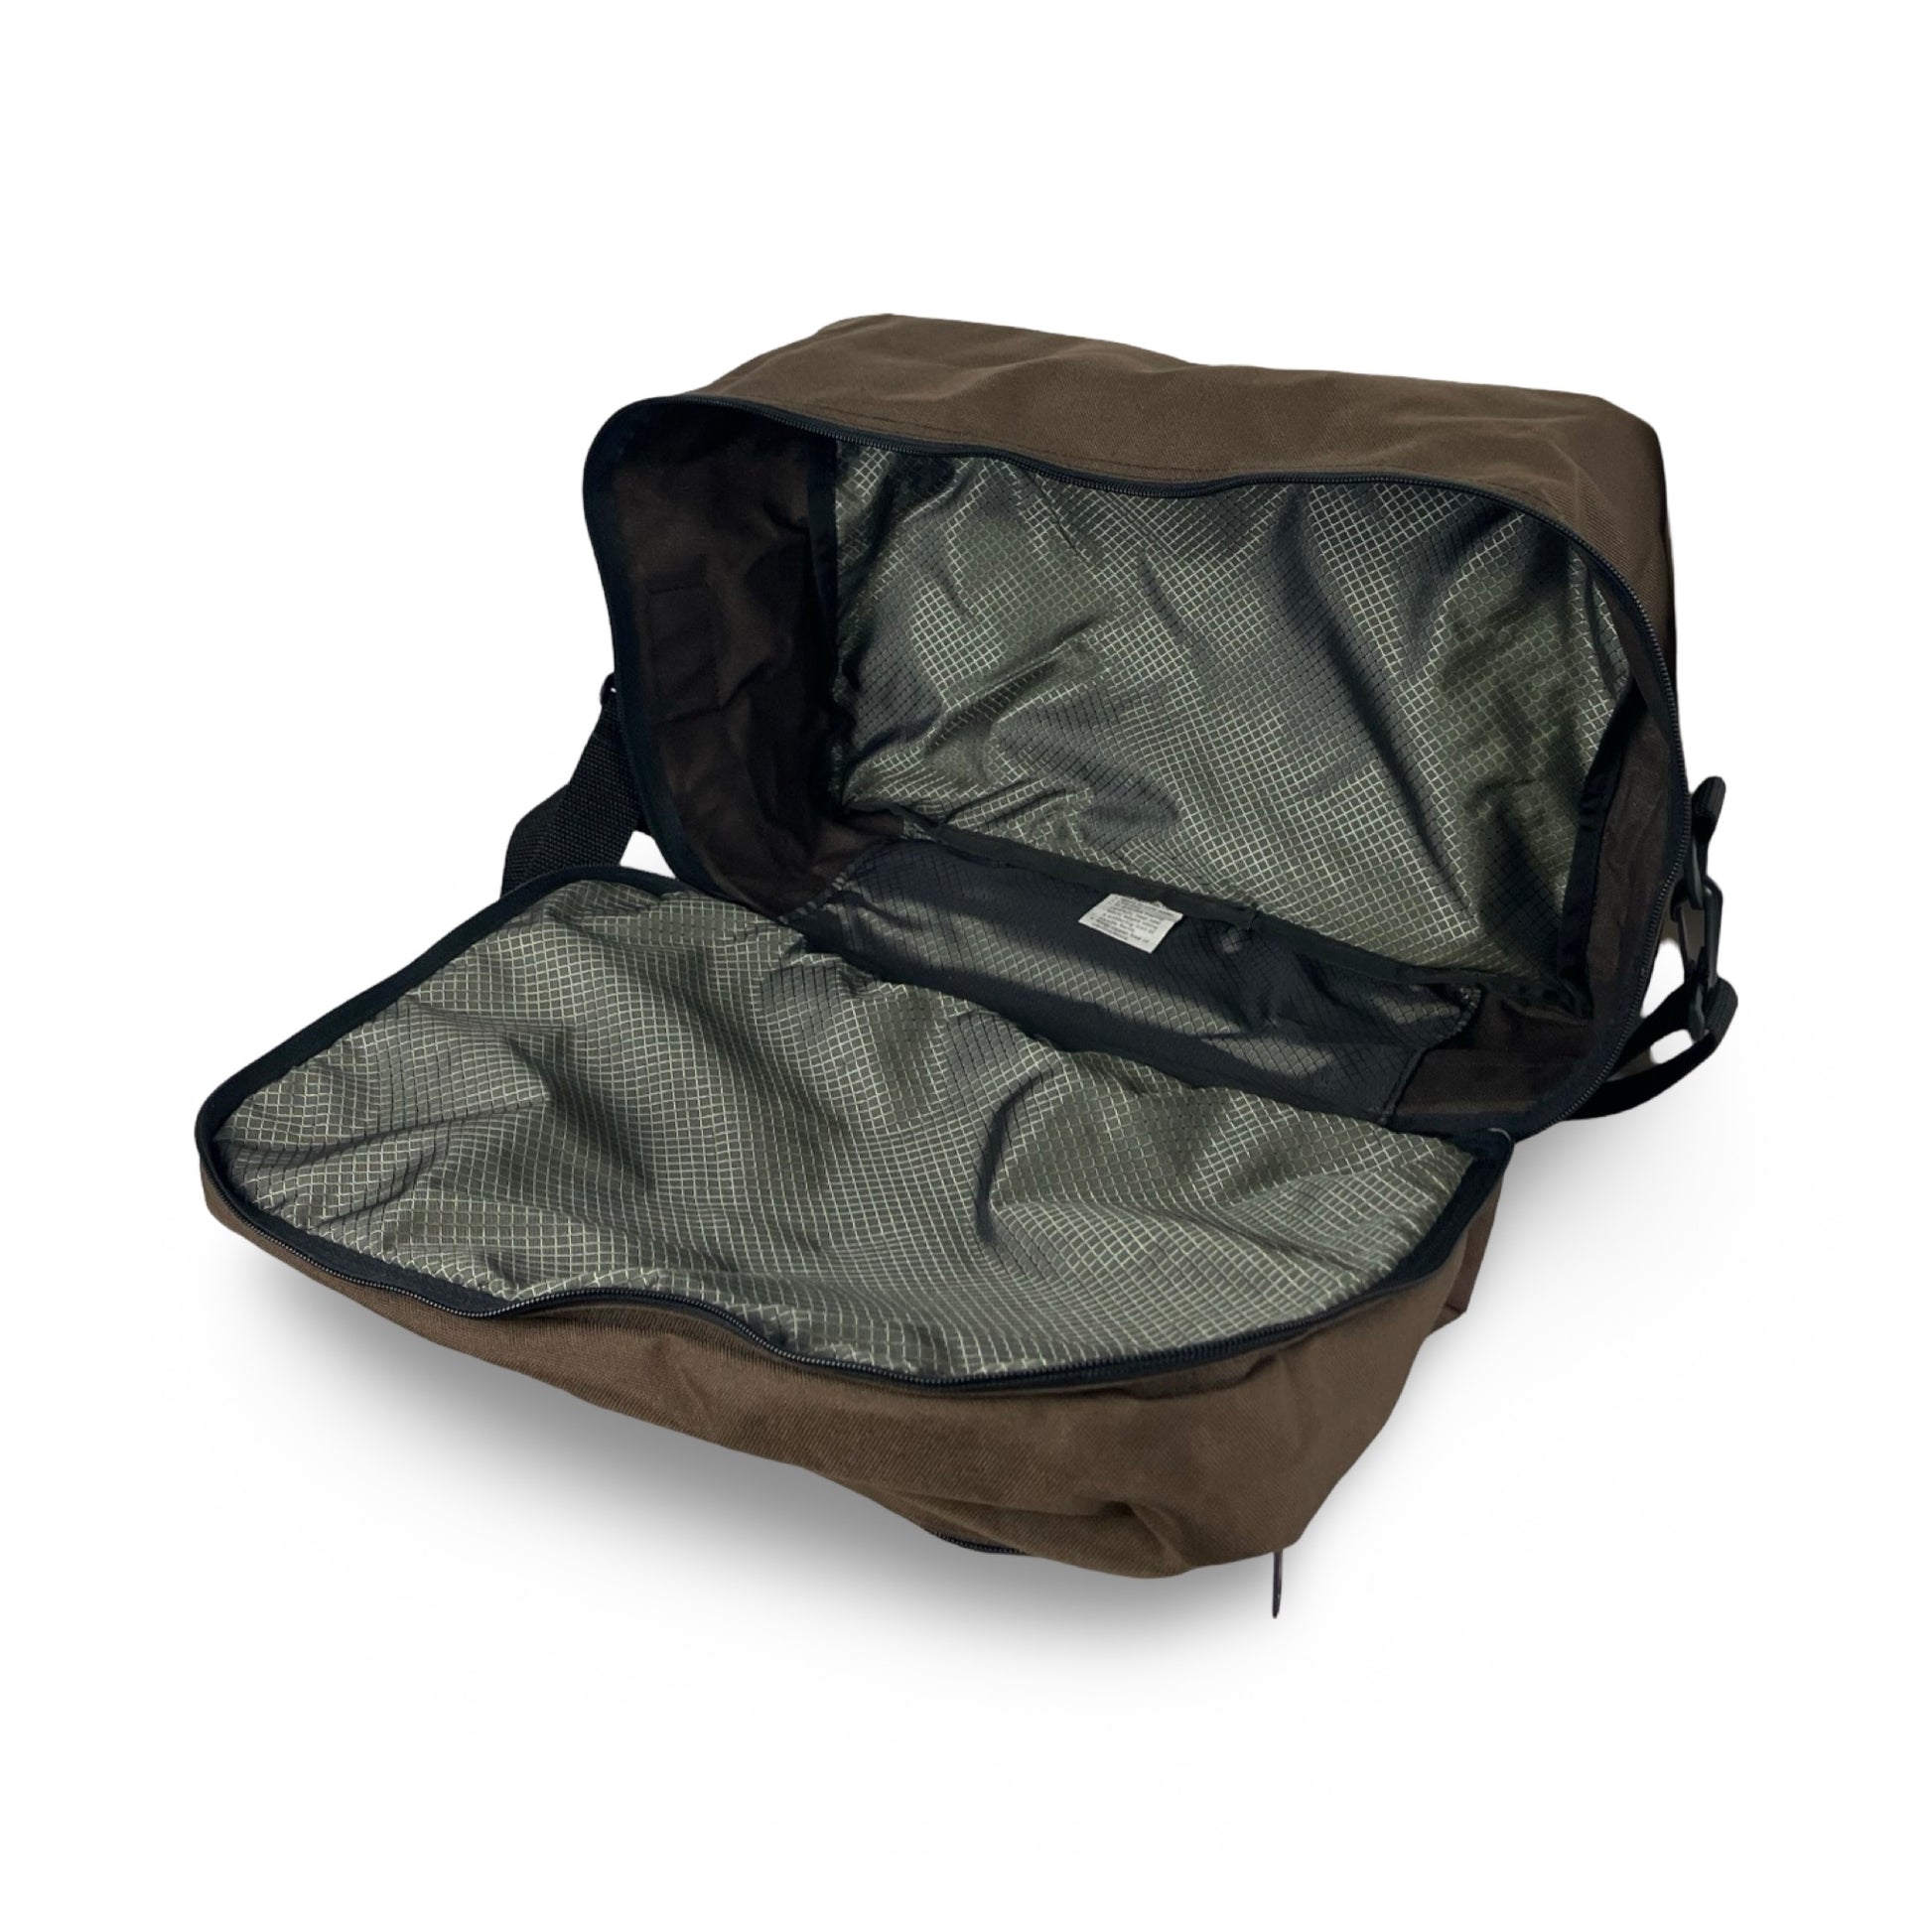 FLIGHT BAG Personal Bag Carry-on Luggage, by Tough Traveler. Made in USA since 1970